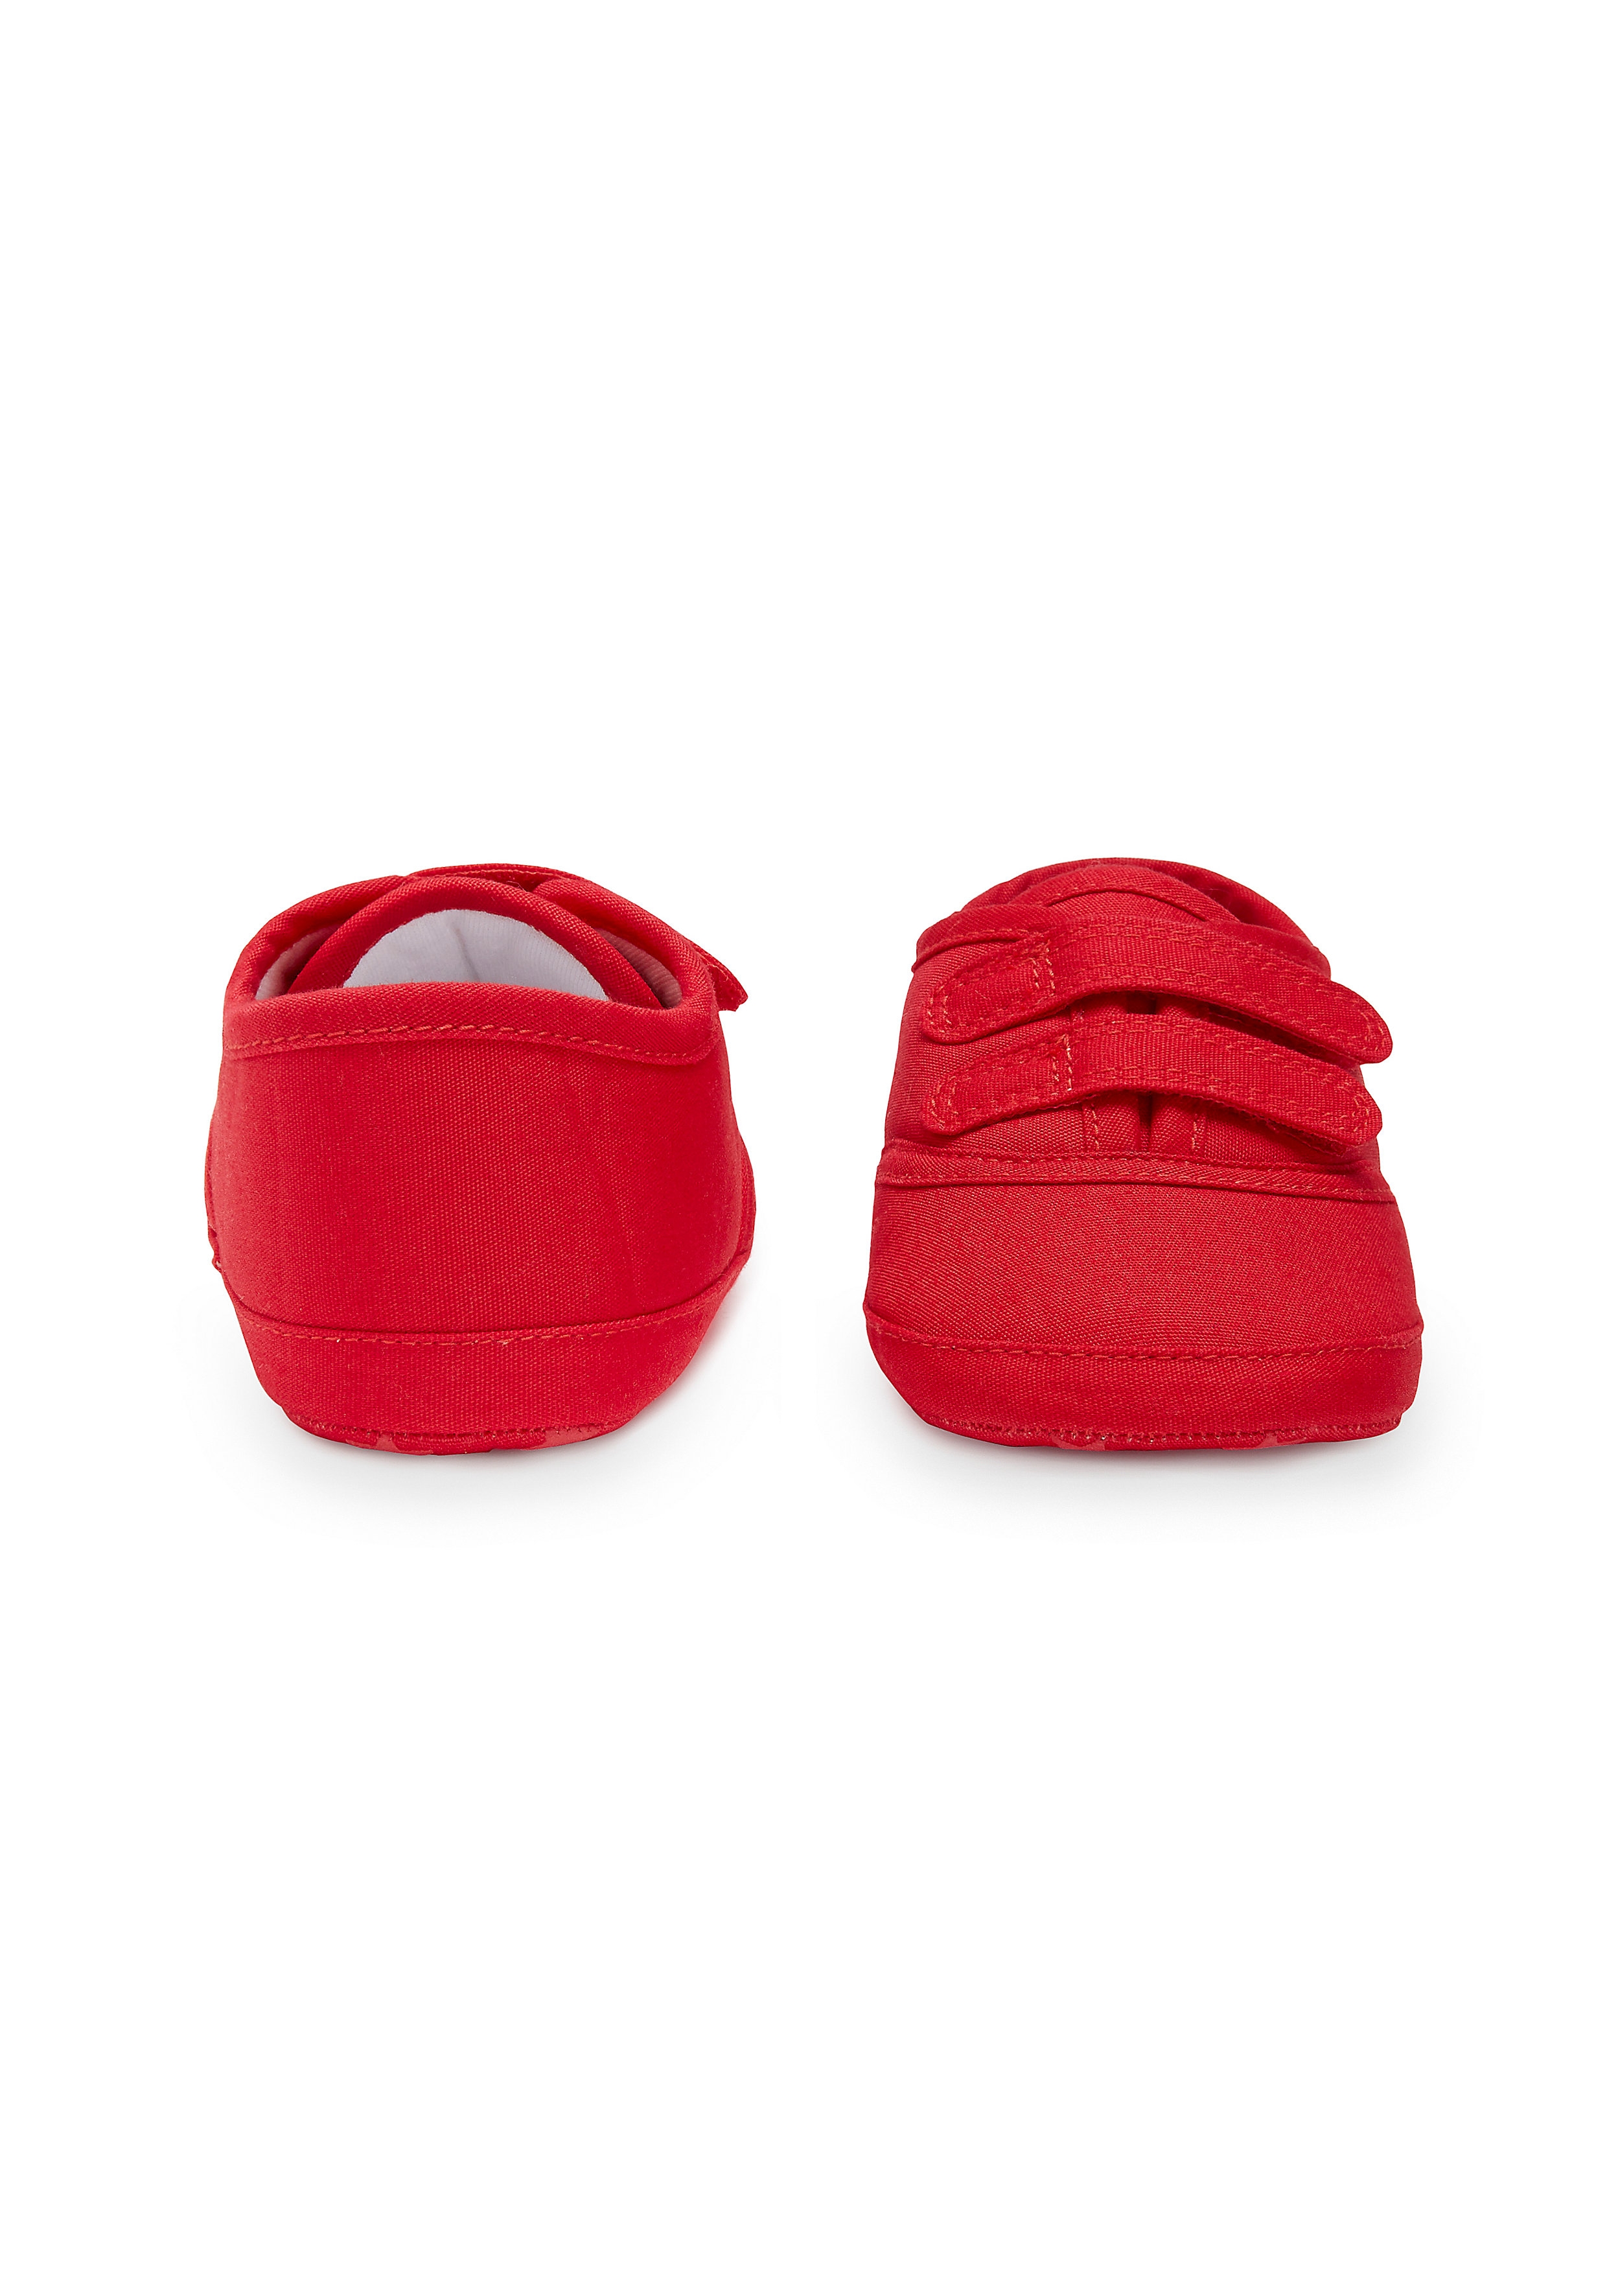 Mothercare | Boys Pram Shoes - Red 1